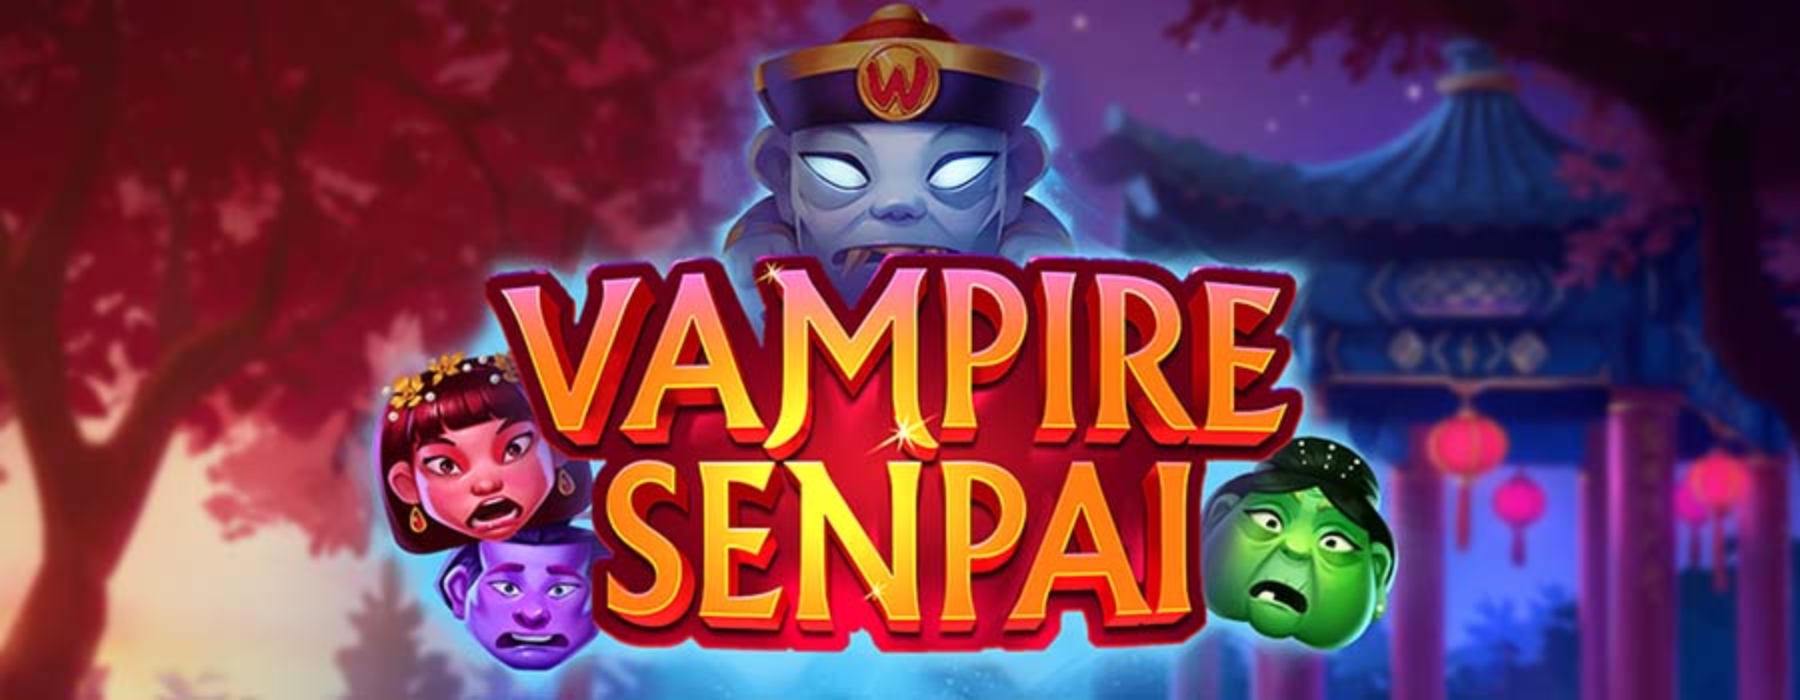 The Vampire Senpai Online Slot Demo Game by Quickspin